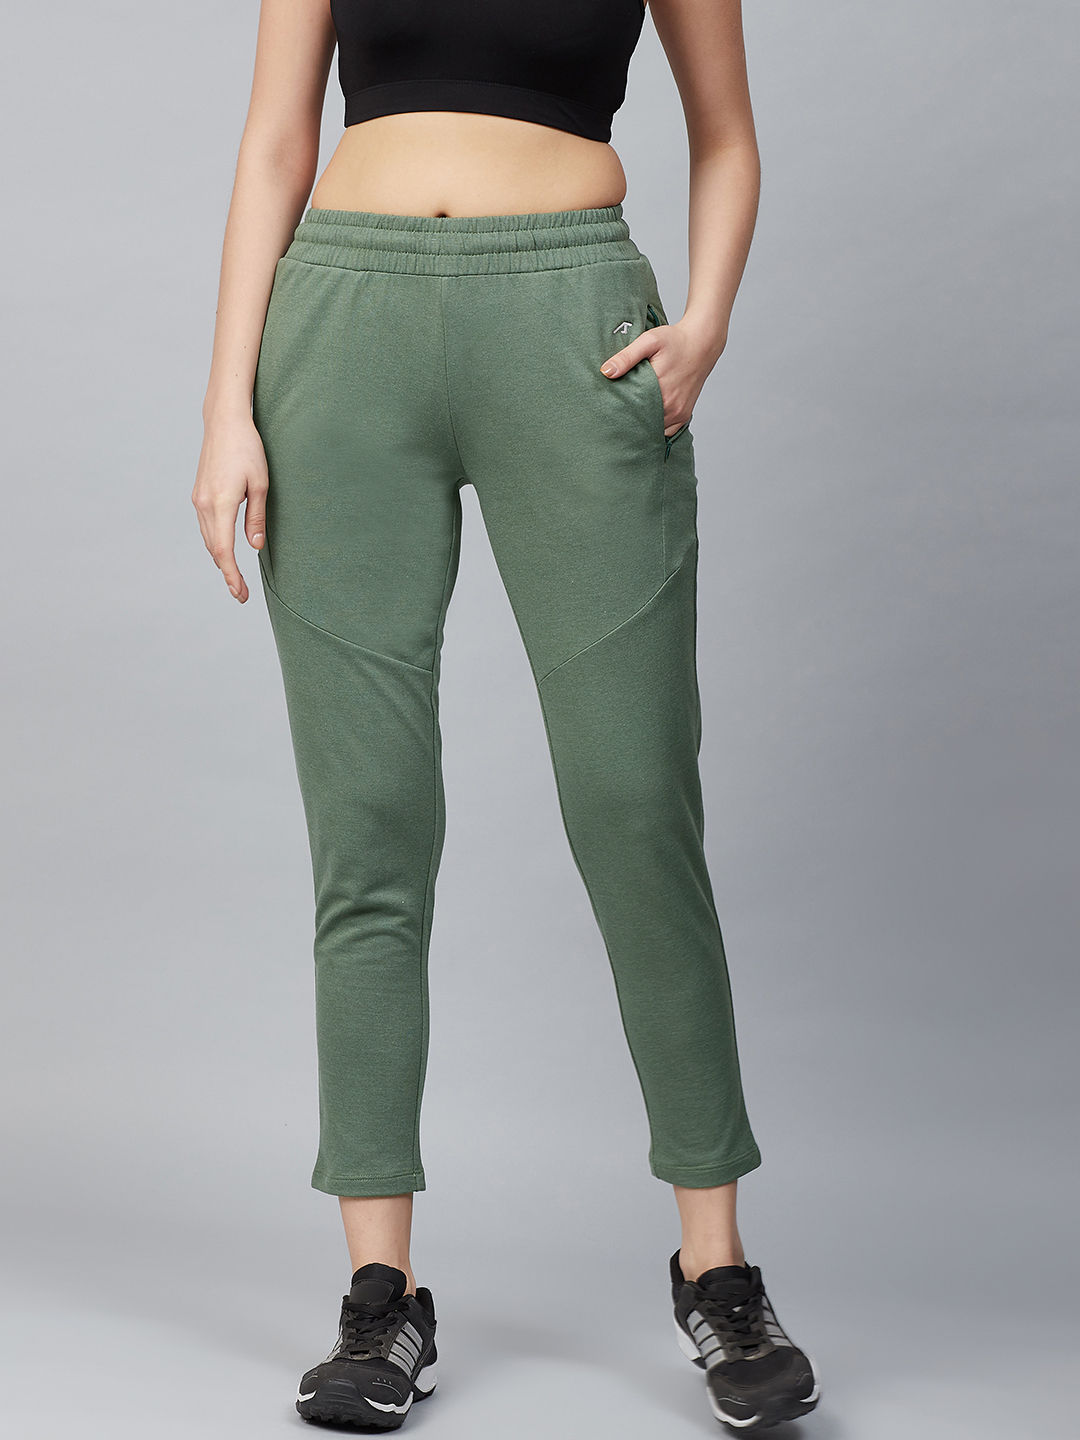 Buy Go Colors Women Solid Cotton Green Mid Rise Joggers - Olive Online